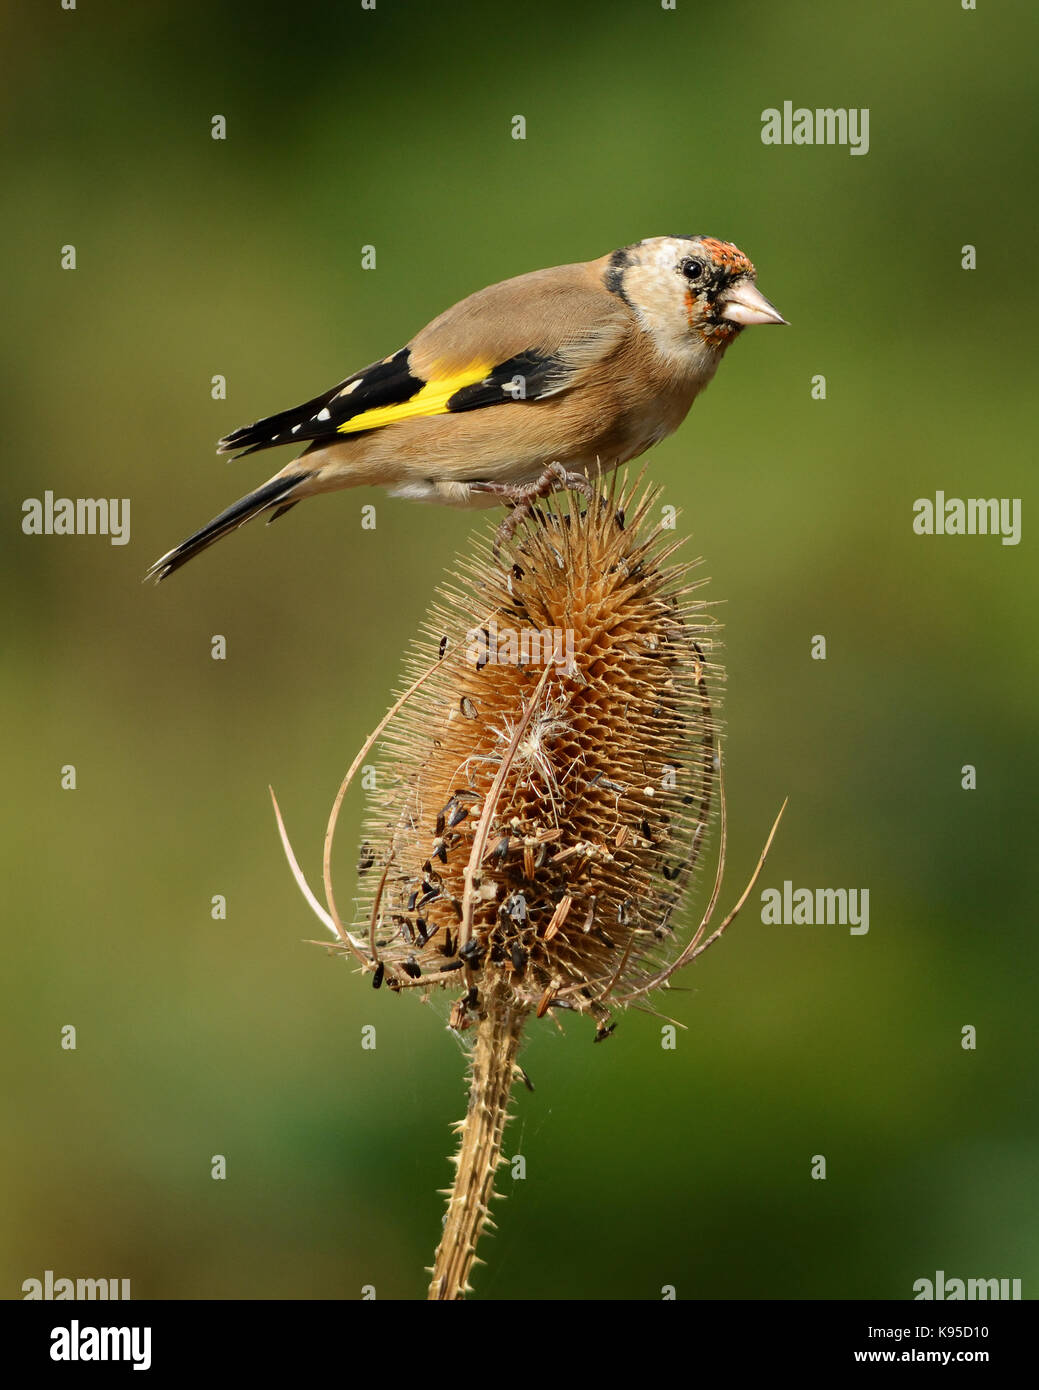 European goldfinch common garden bird pictured in a natural dappled sunlight light in England UK on classic teasel head Stock Photo